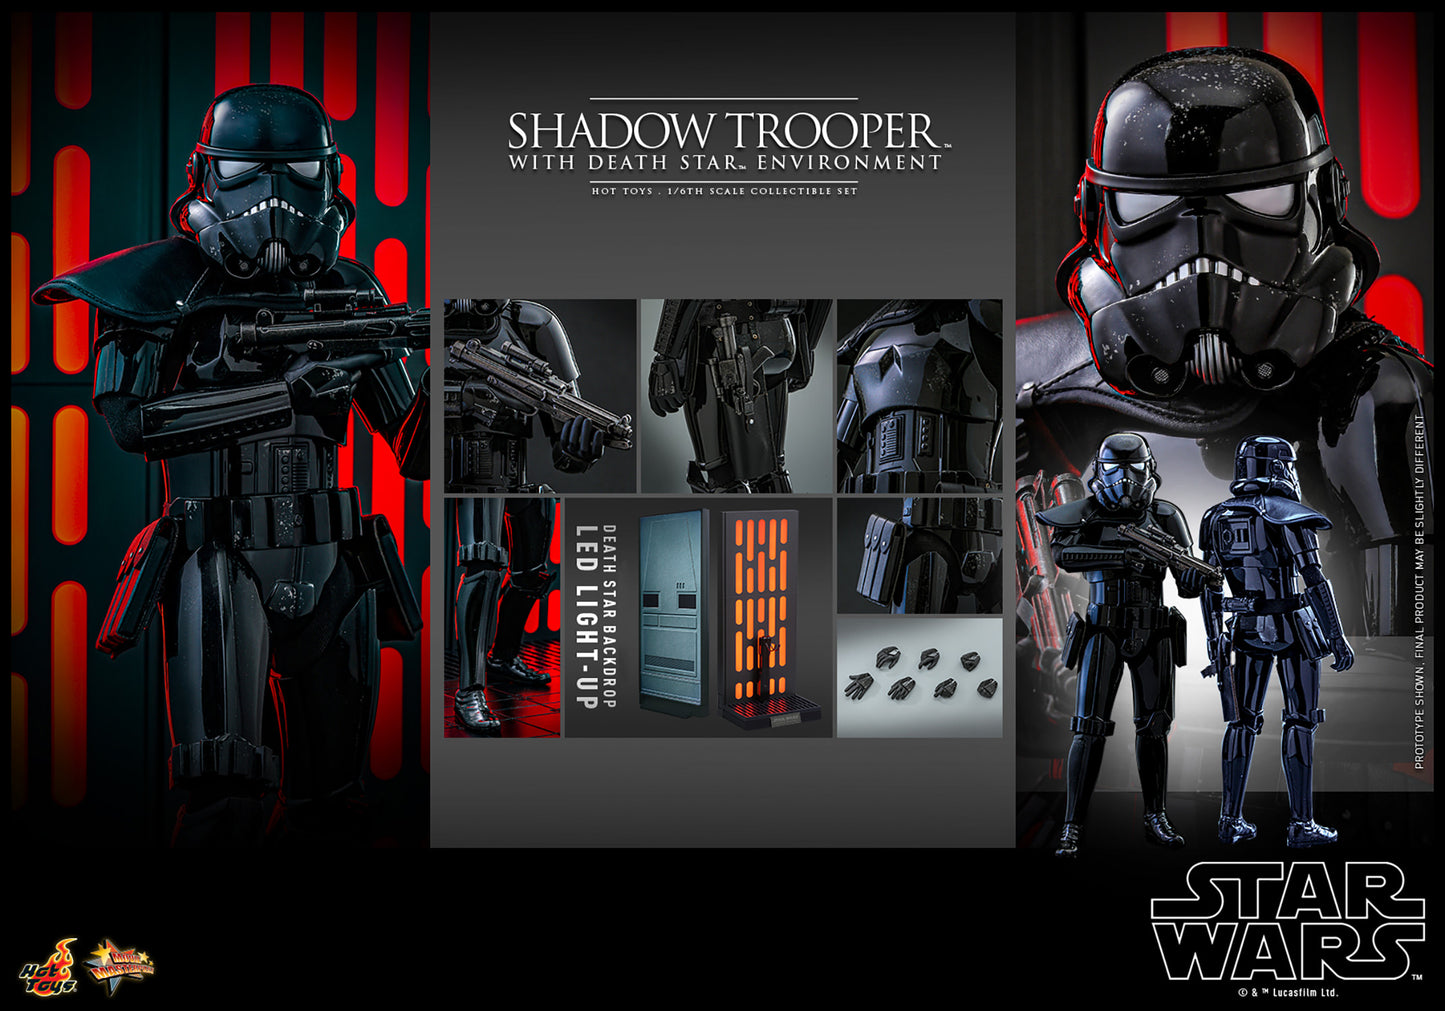 STAR WARS HOT TOYS 1/6 SCALE Shadow Trooper™ with Death Star Environment